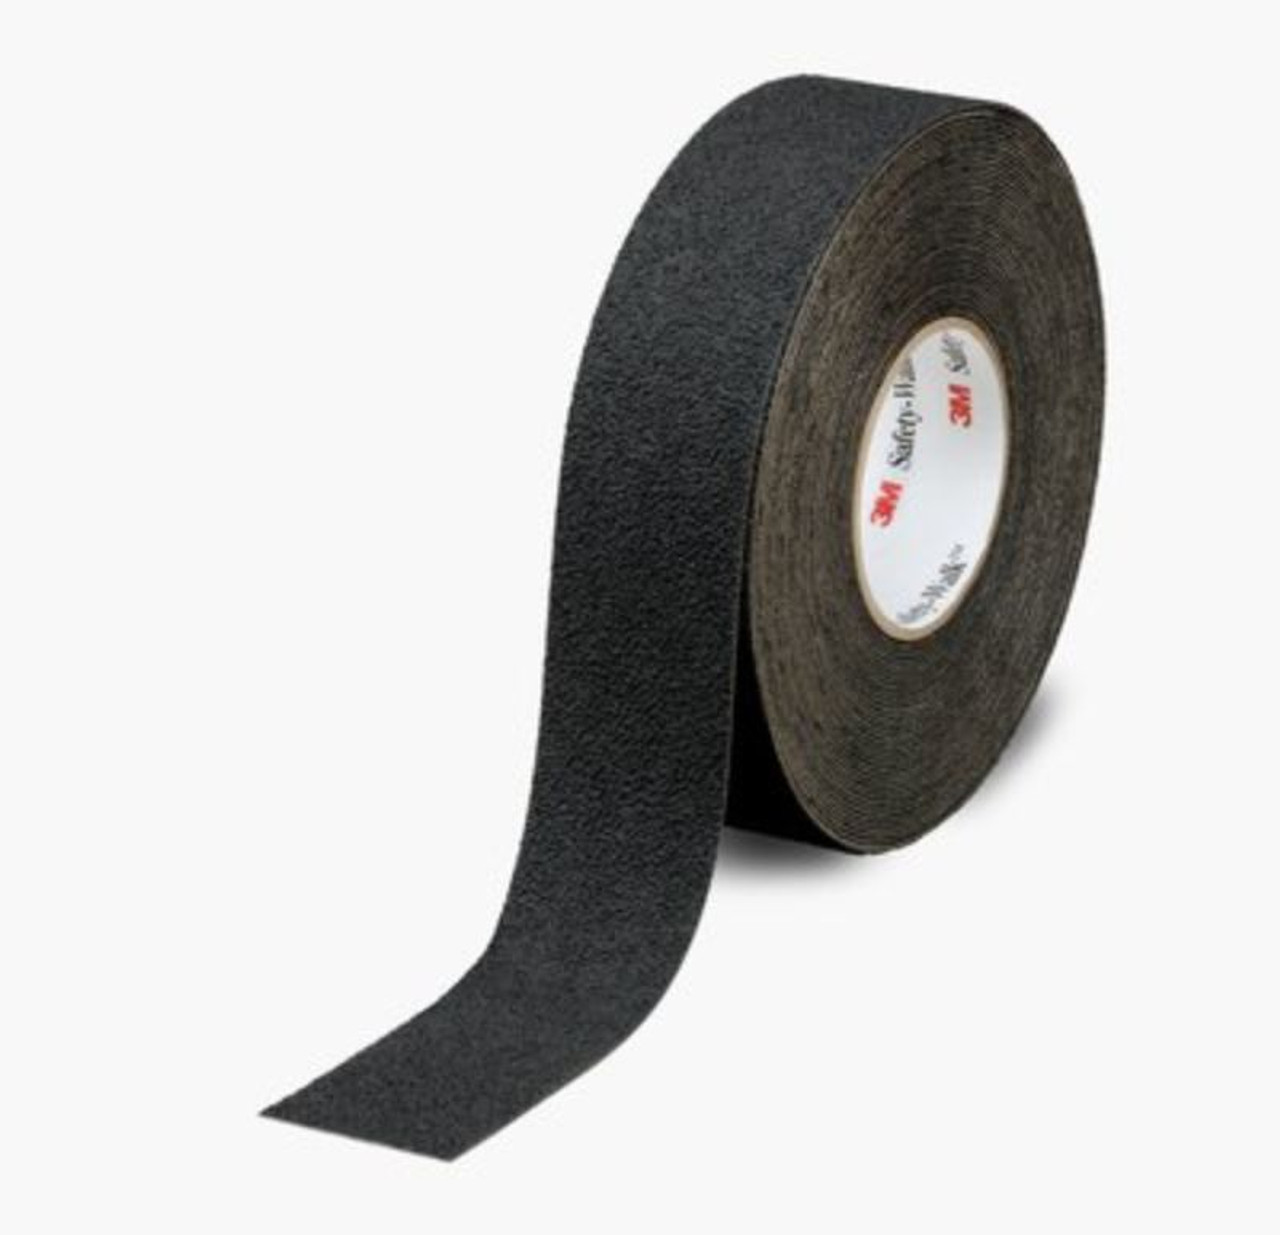 3M™ Safety-Walk™ Slip-Resistant Medium Resilient Tapes & Treads 310, Black, 48 in x 60 ft, Roll